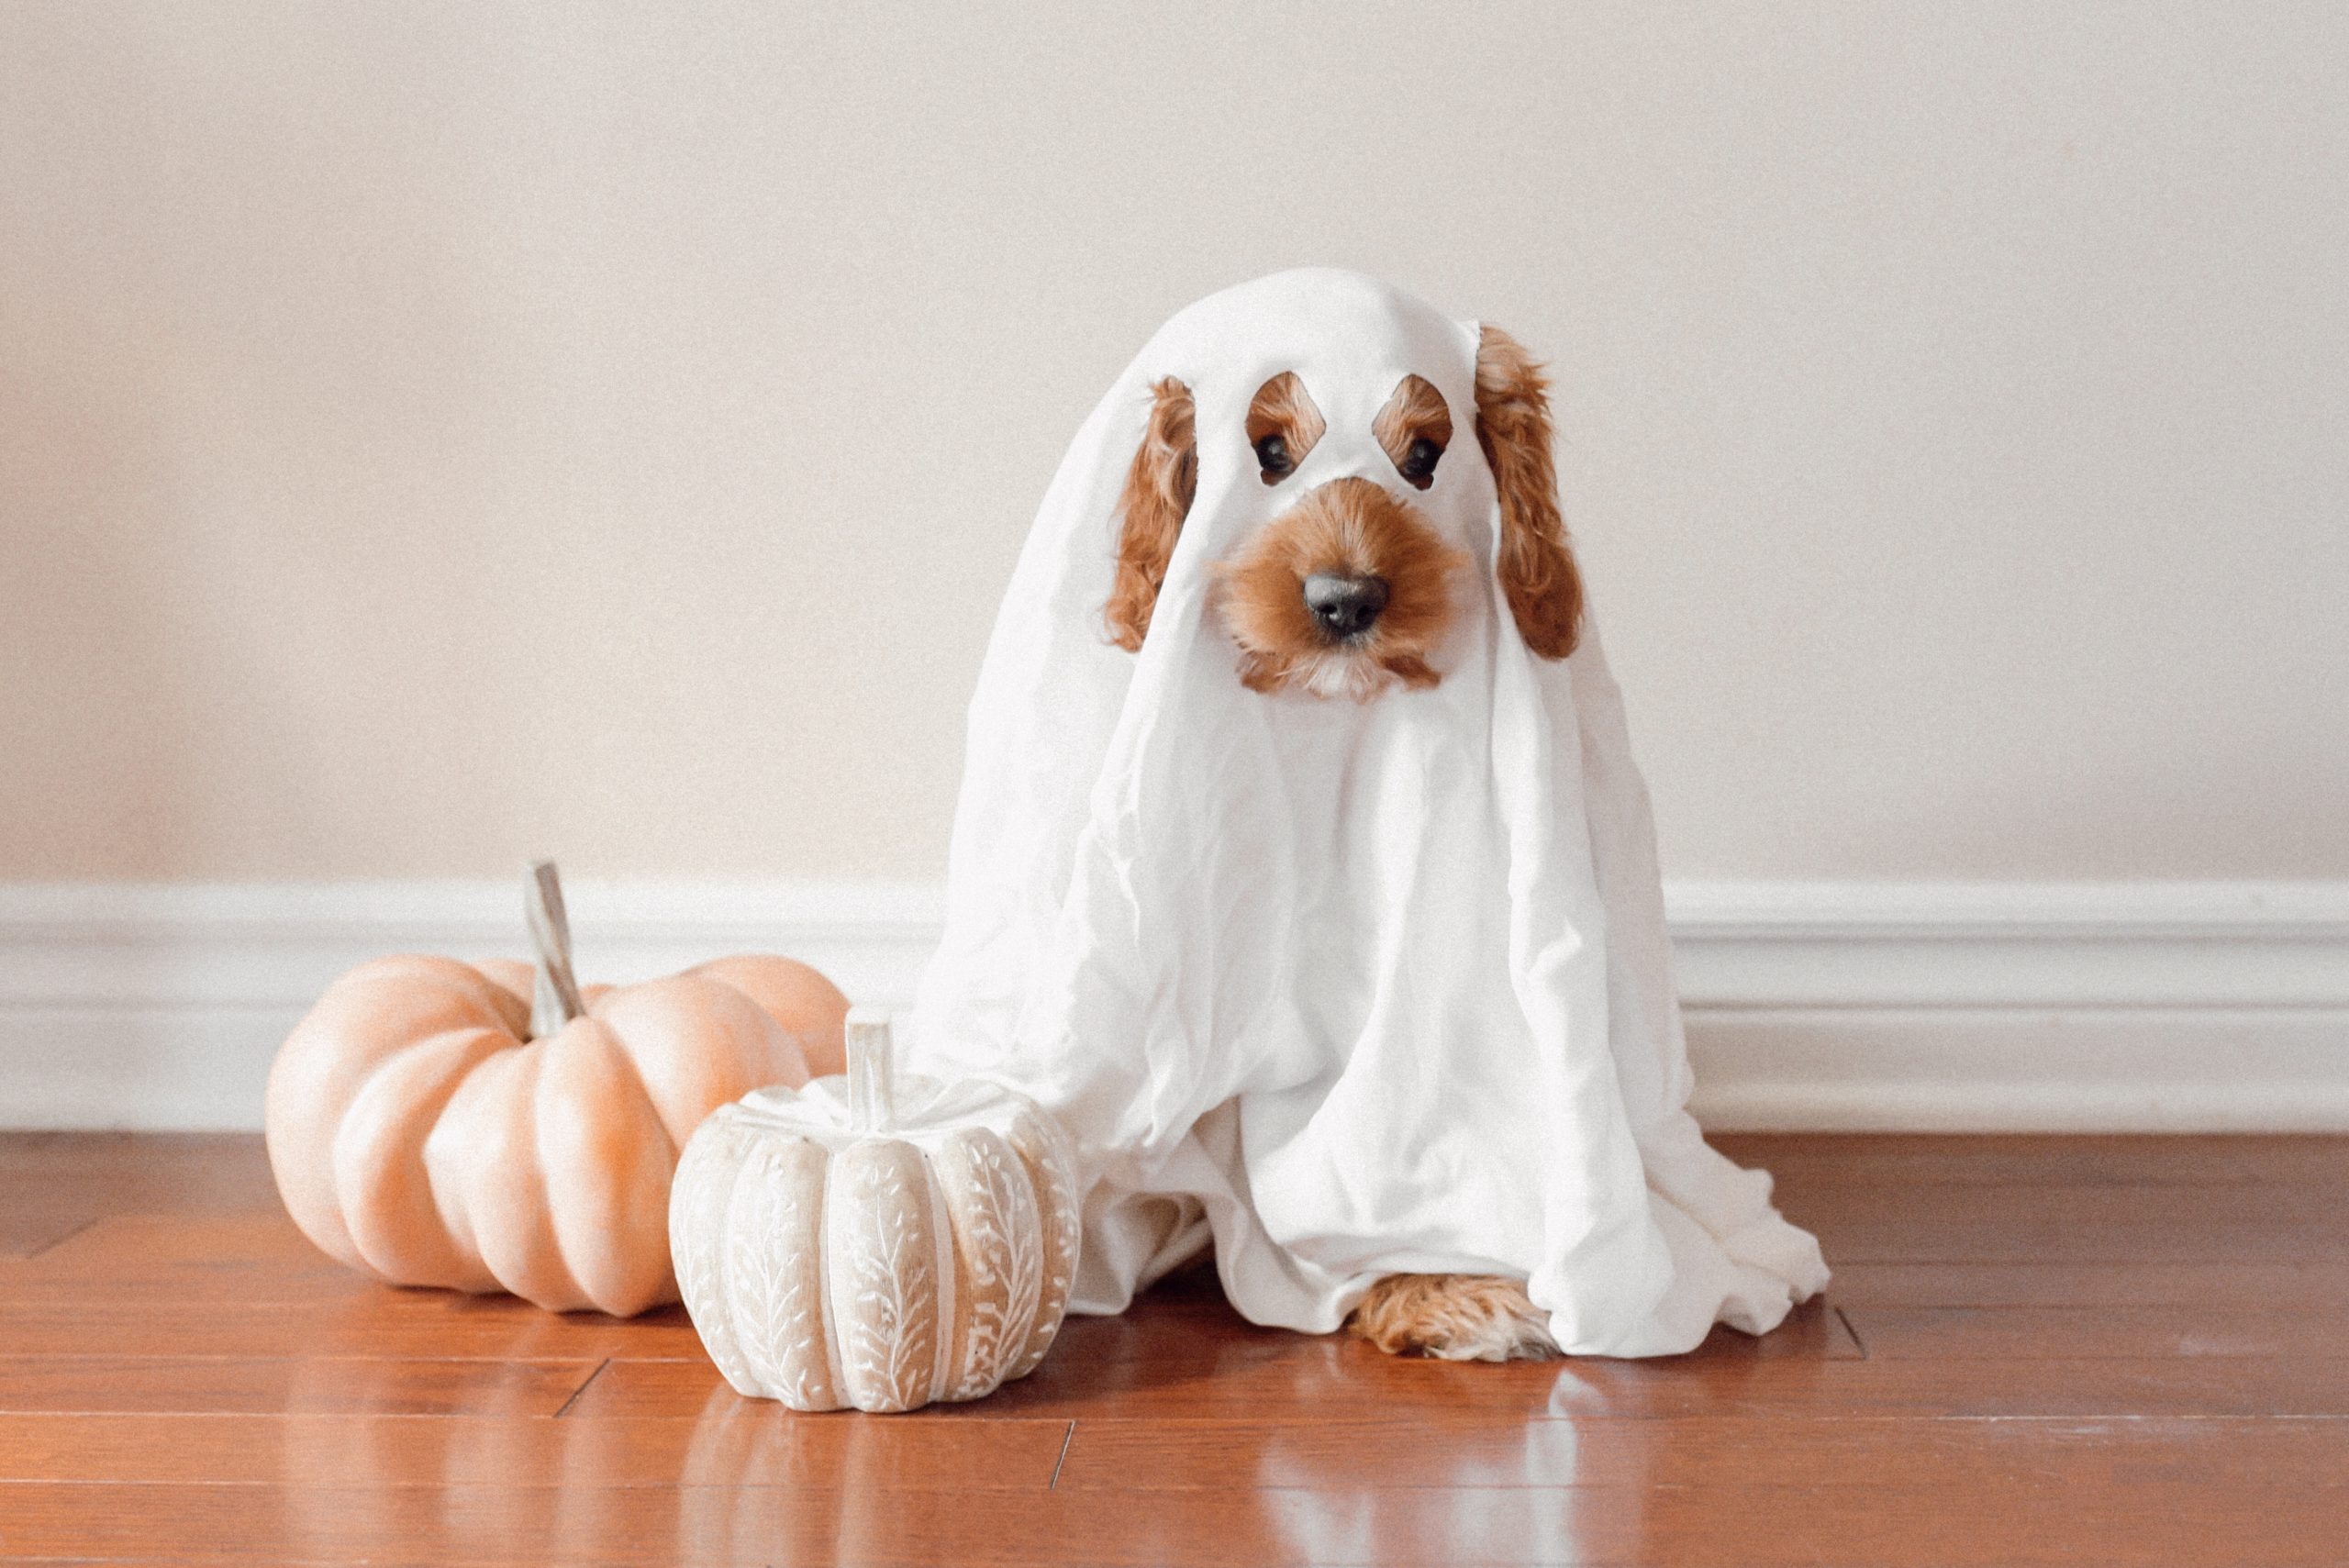 Fall Fundraising ideas - A cute dog is wearing a ghost costume and sitting next to a pumpkin